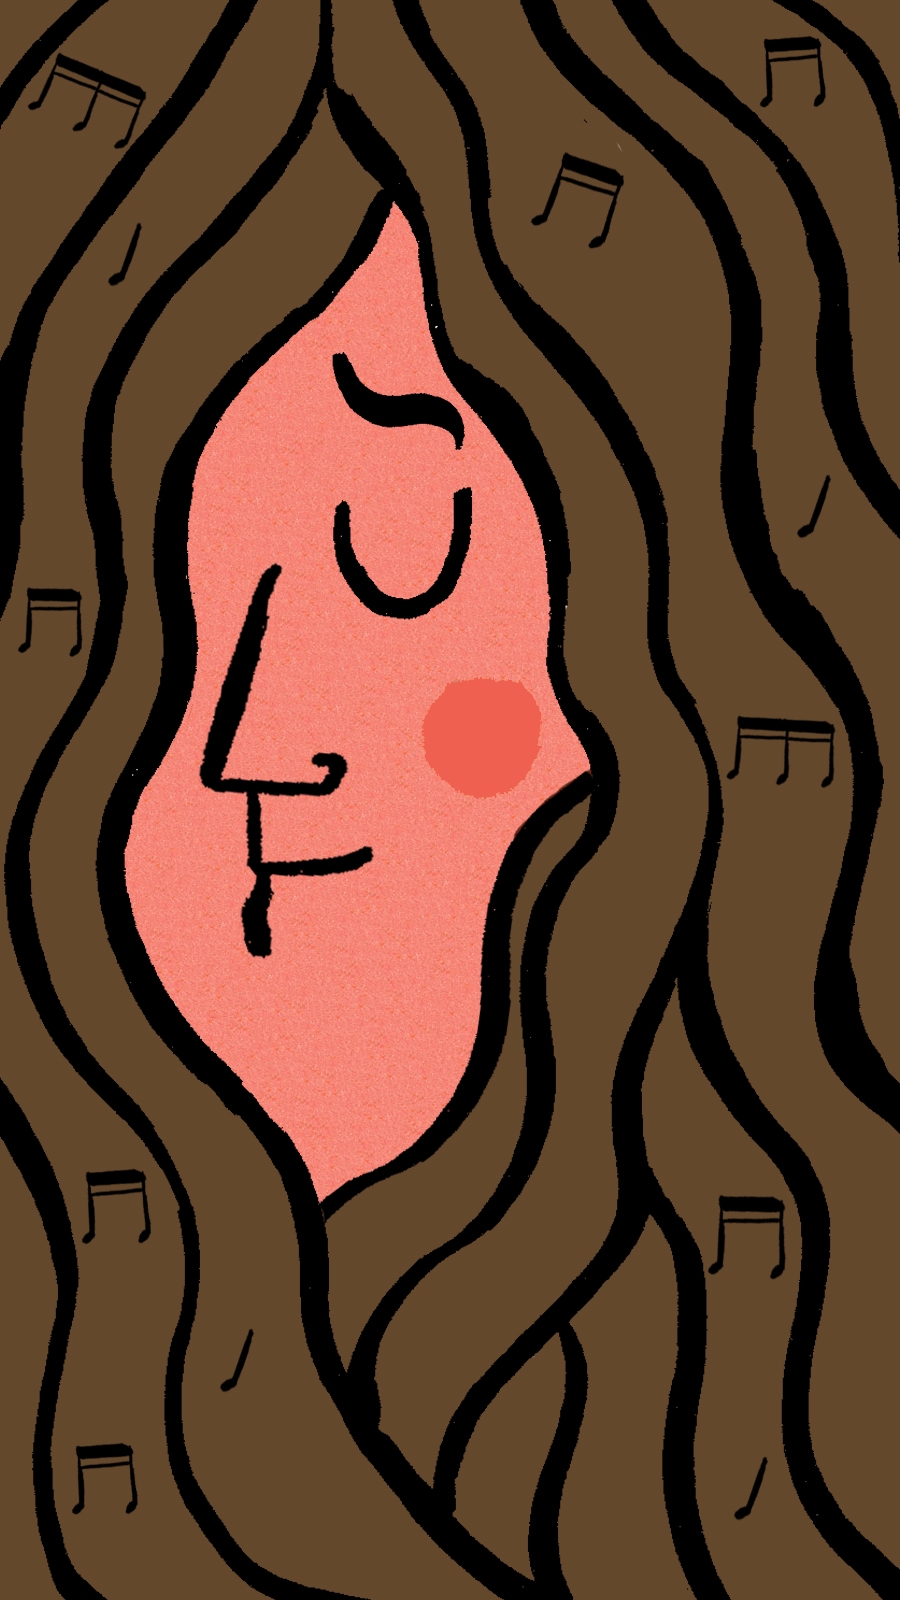 Illustration of a face, with closed eyes, and surrounded by long hair.